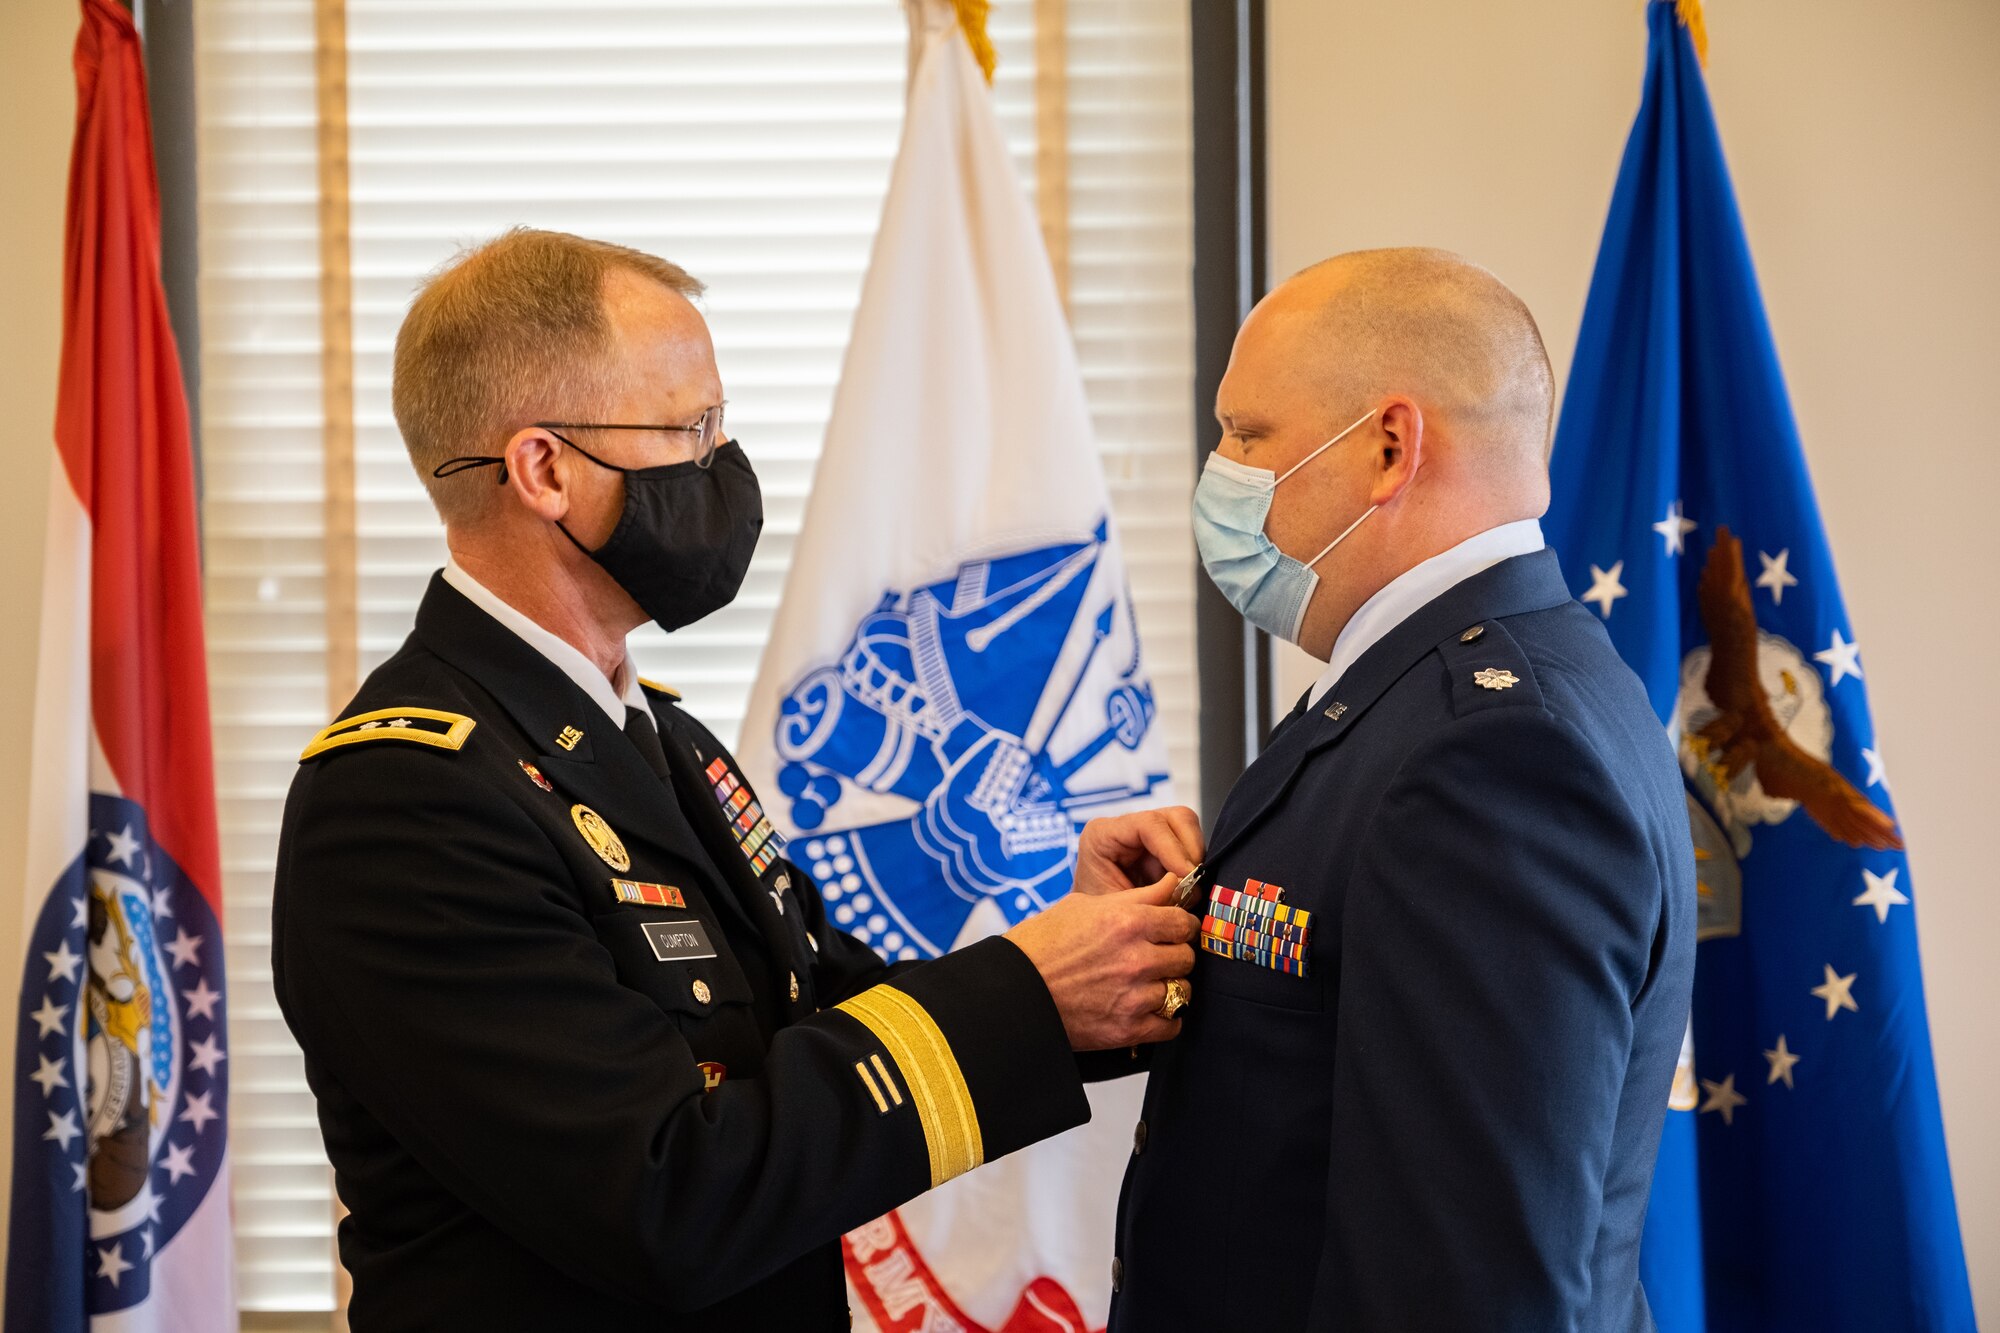 Adjutant General of the Missouri National Guard Maj. Gen. Levon Cumpton presents Lt. Col. Matthew Pieper, a Center for Sustainment of Trauma and Readiness Skills instructor, with the Distinguished Flying Cross during a ceremony at Jefferson Barracks Air National Guard Base, Missouri, September 12, 2021. Pieper was decorated for his lifesaving actions during a 2018 aeromedical evacuation flight while deployed to Afghanistan. (U.S. Air National Guard photo by Master Sgt. Stephen Froeber)